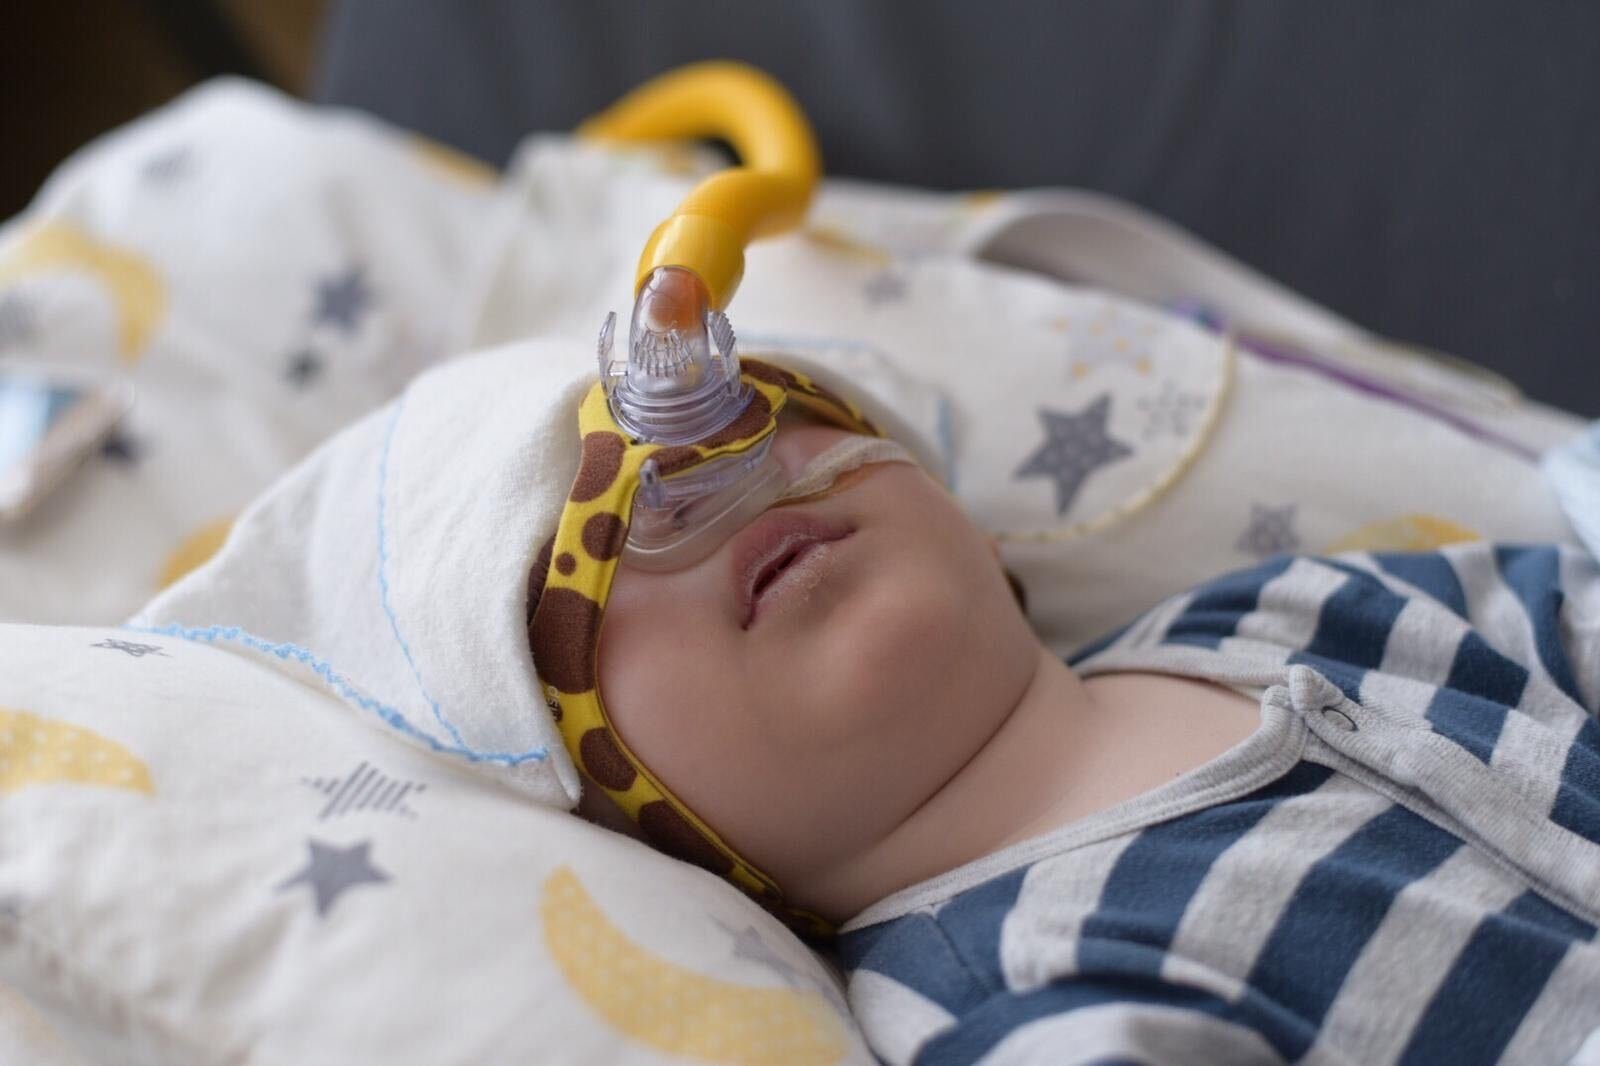 Eleven-month-old Metehan Fidan, unable to breathe properly due to SMA, depends on a machine to survive.